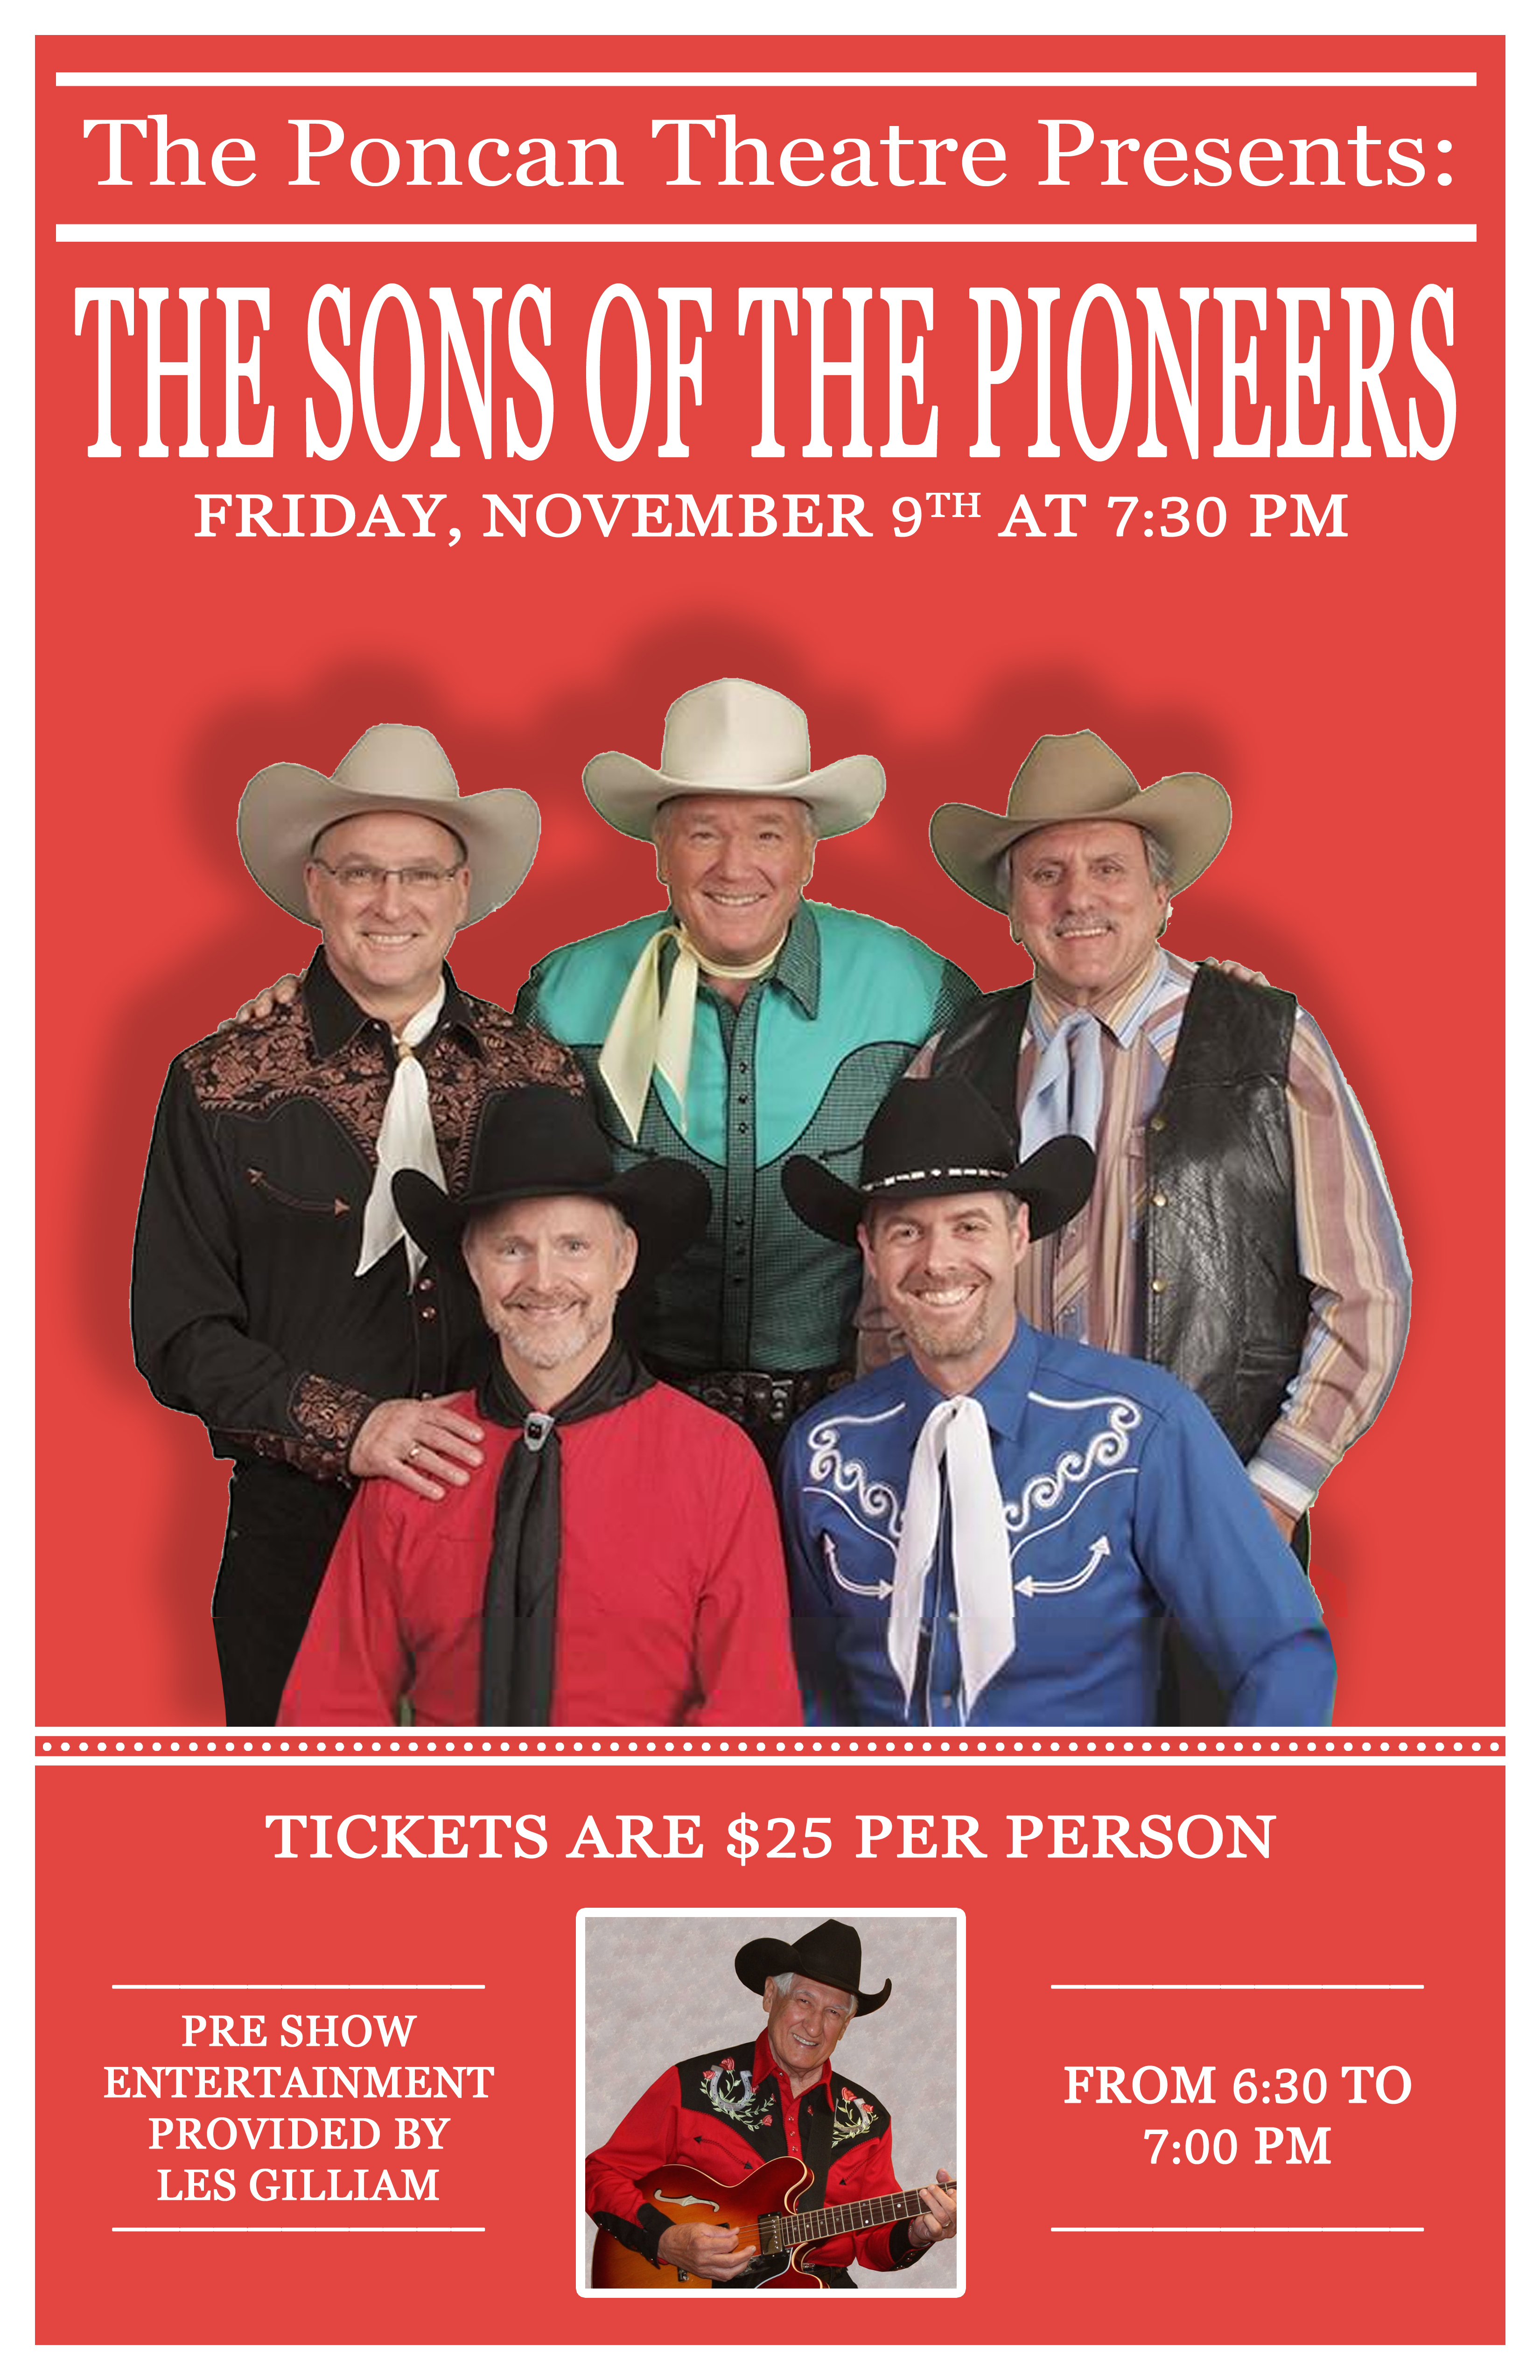 The Poncan Theatre  presents Sons of the Pioneers on Nov. 9